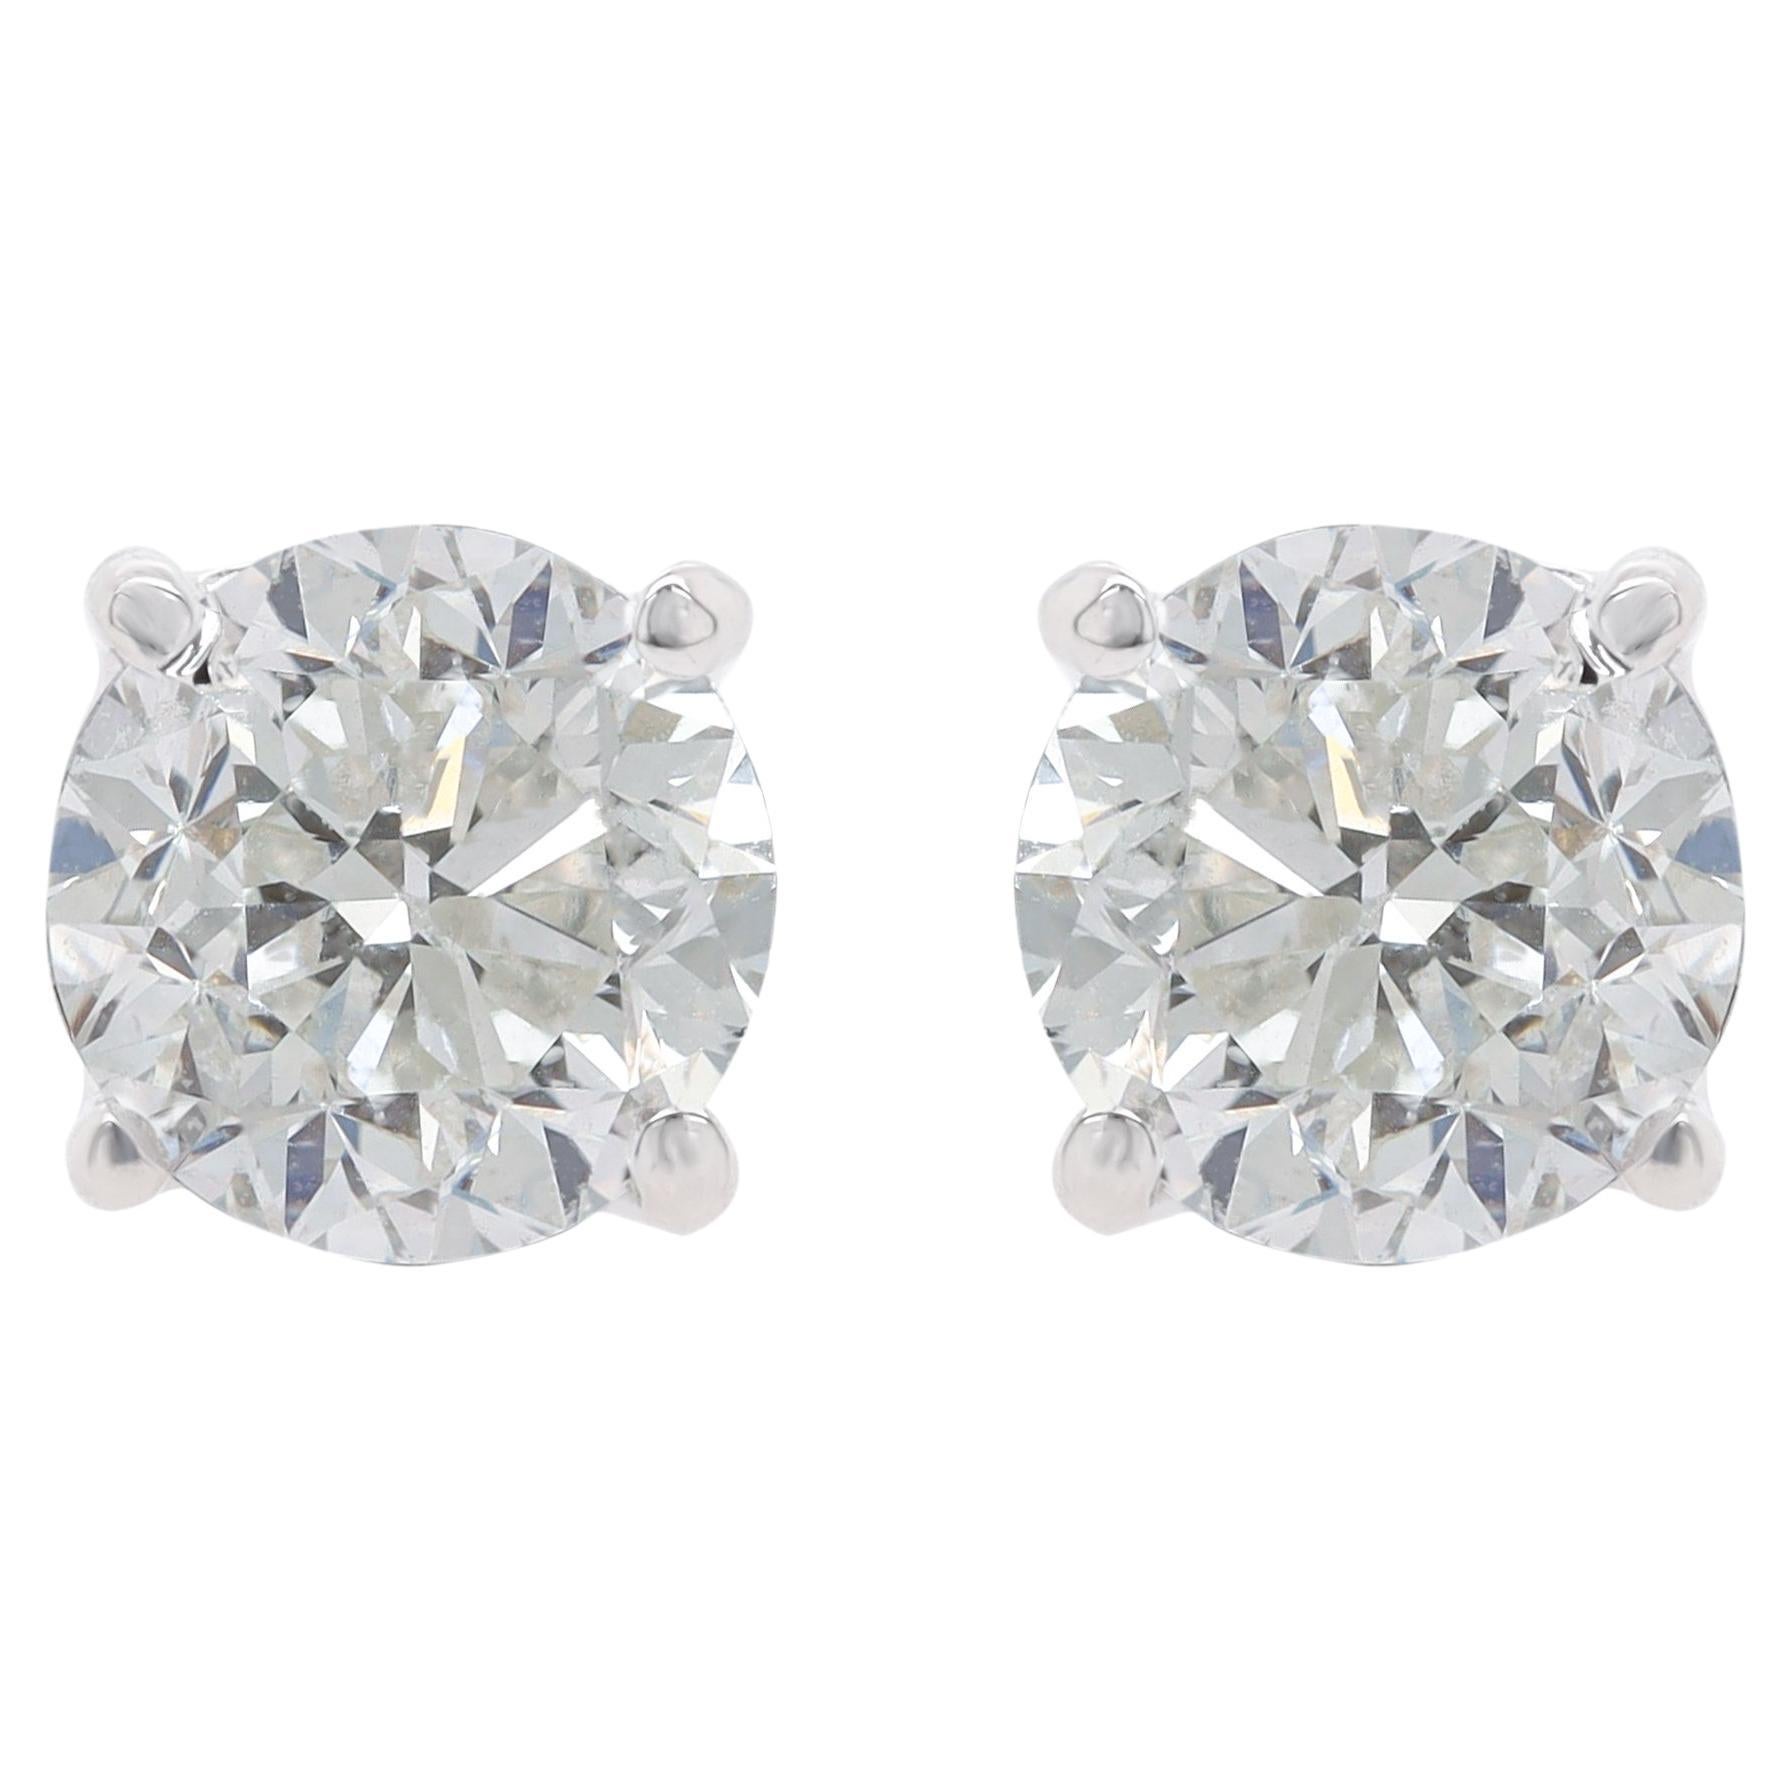 Diana M. 4.02ct Diamond Studs 4-Prong GH Color SI Clarity Screw Backs 